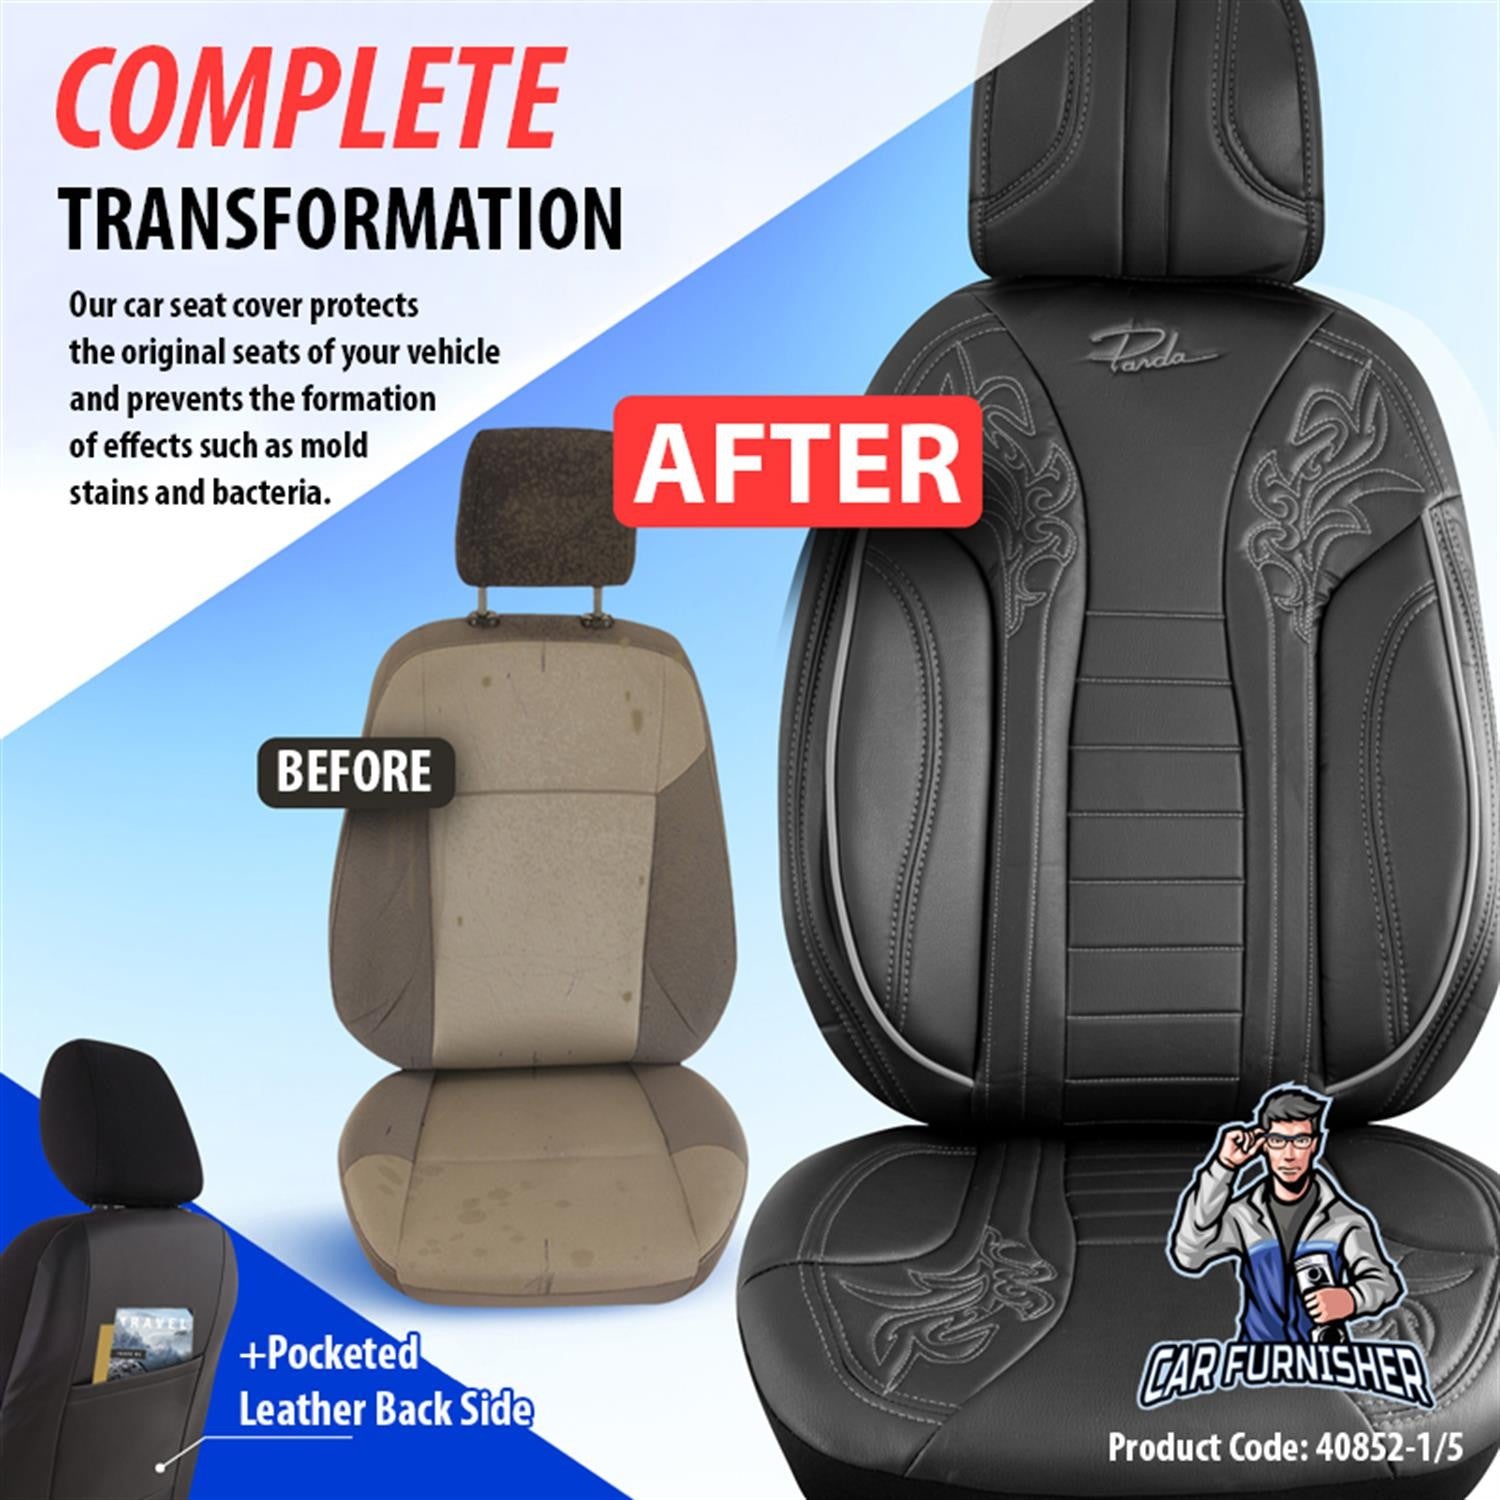 Luxury Car Seat Cover Set (5 Colors) | Tokyo Series Black Full Leather